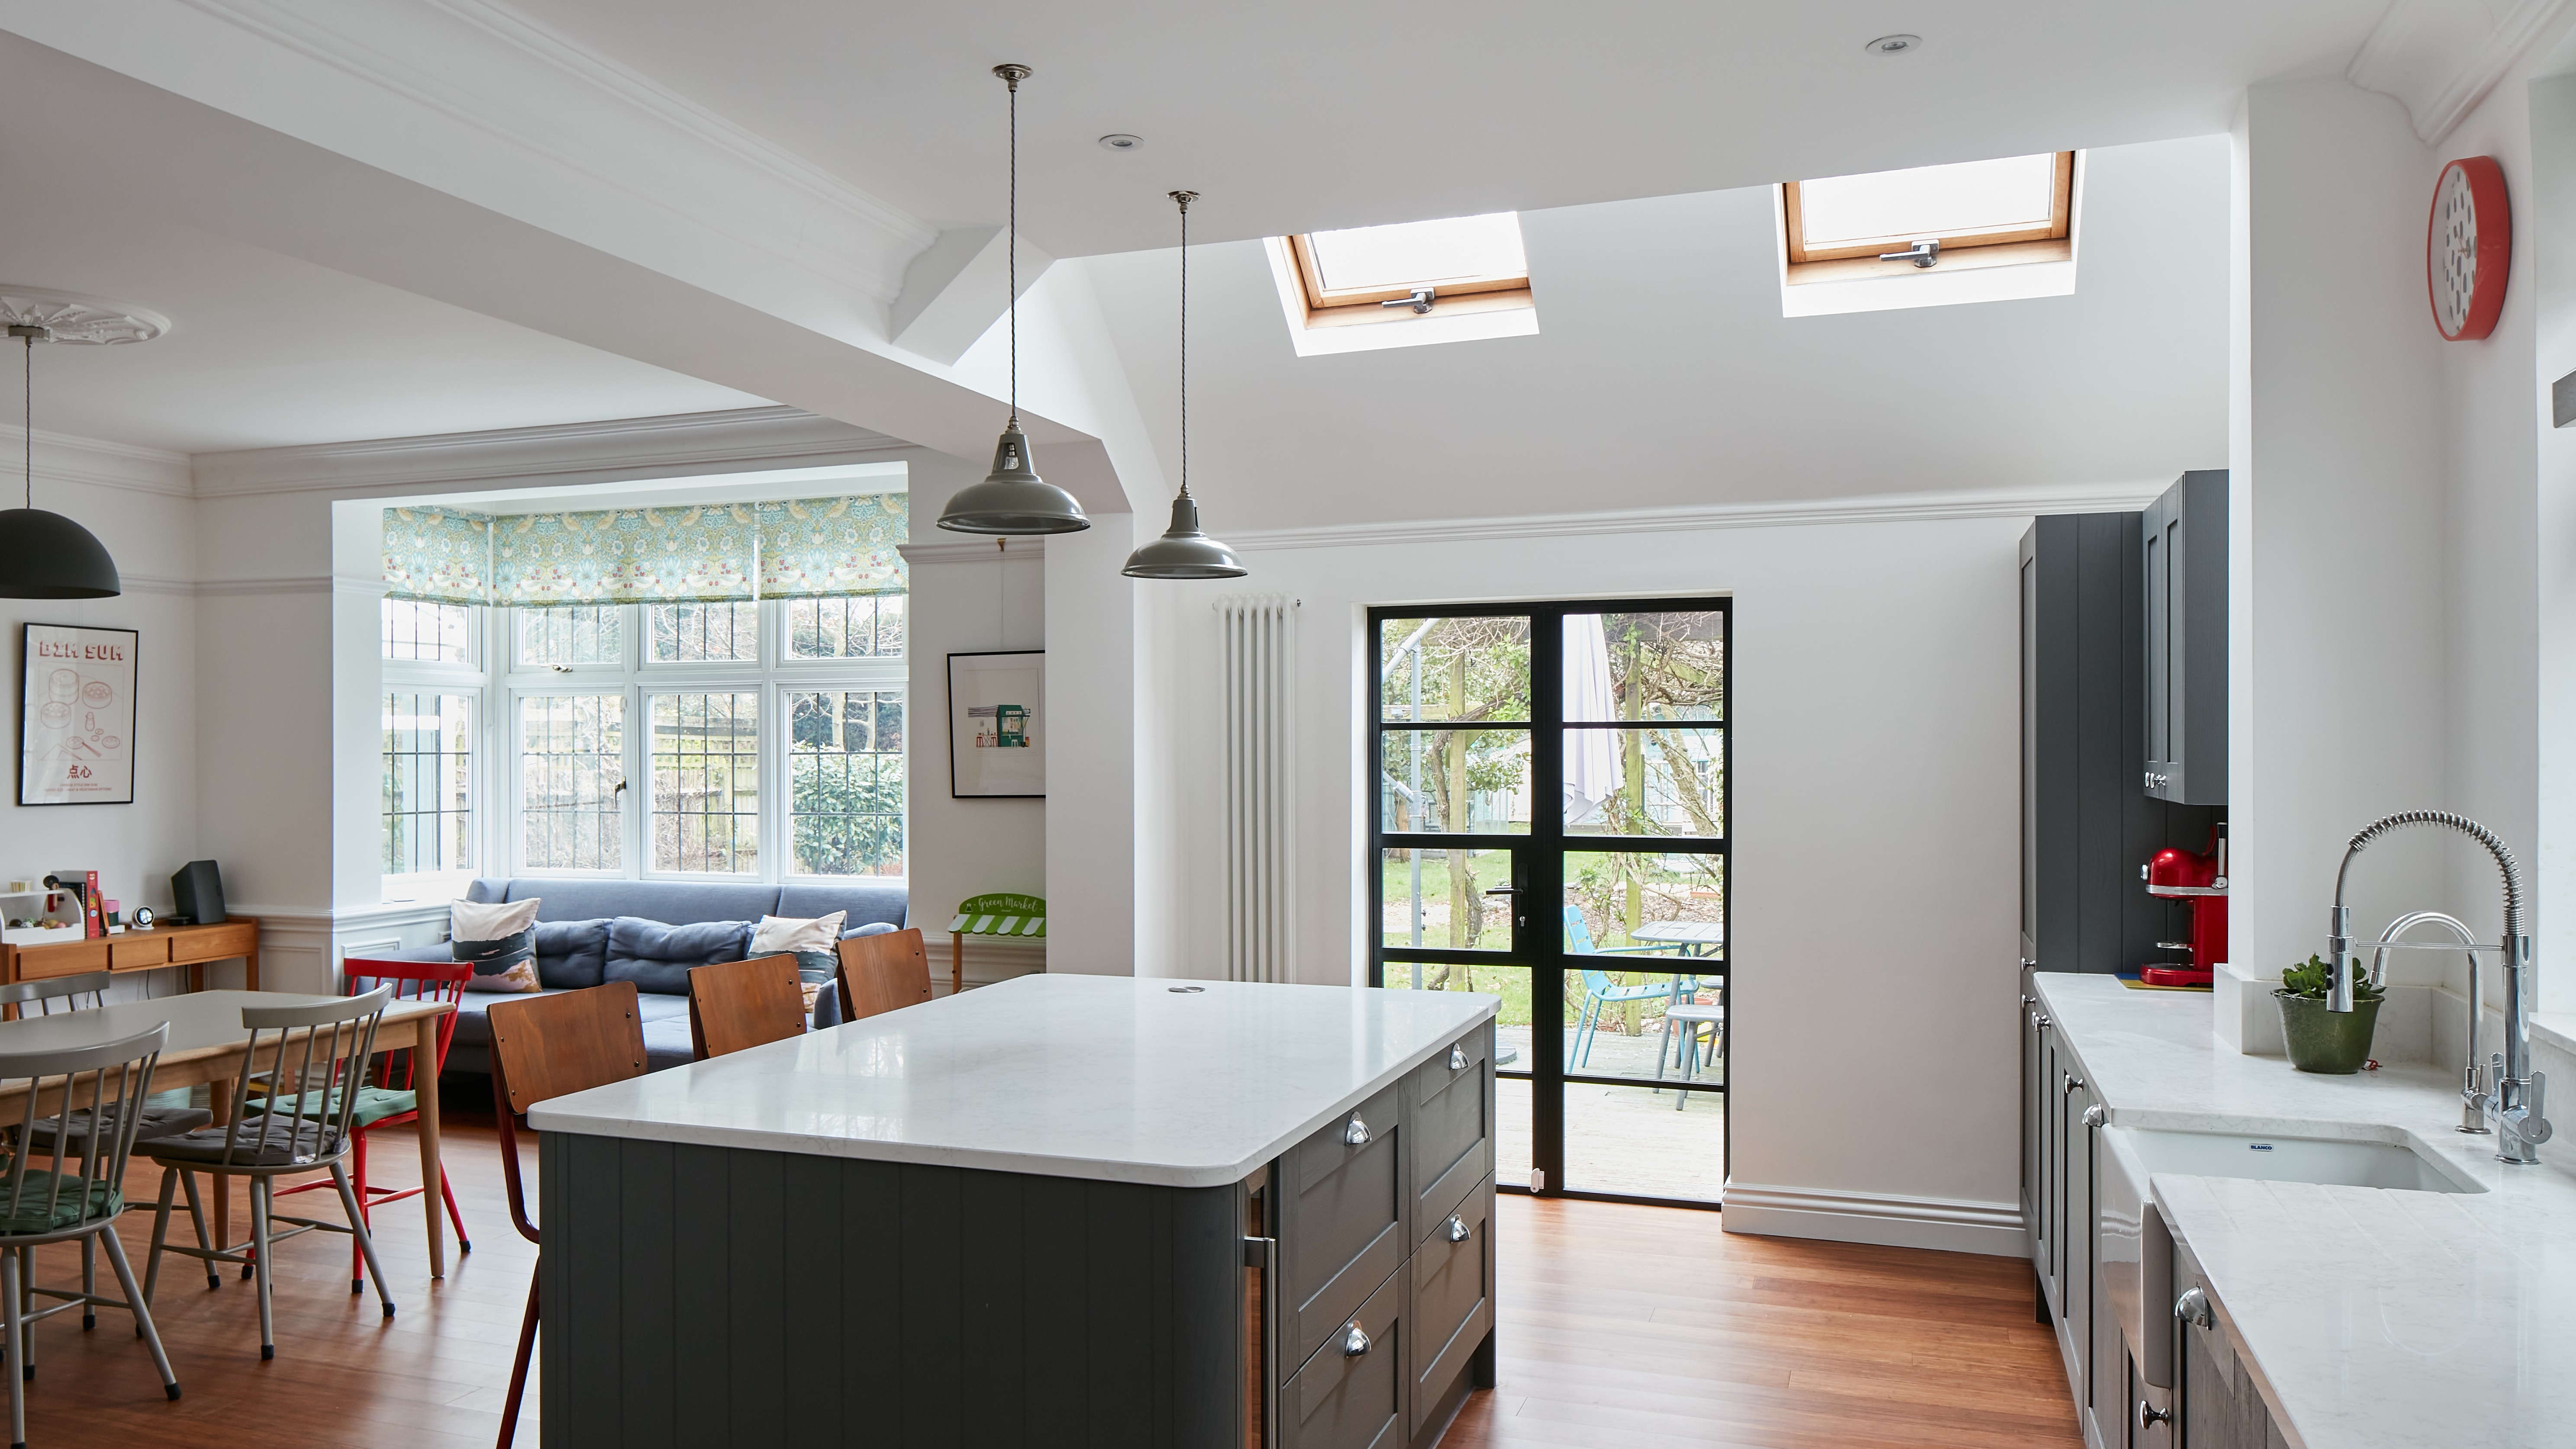 A modern renovation in Bromley that did not require planning permission